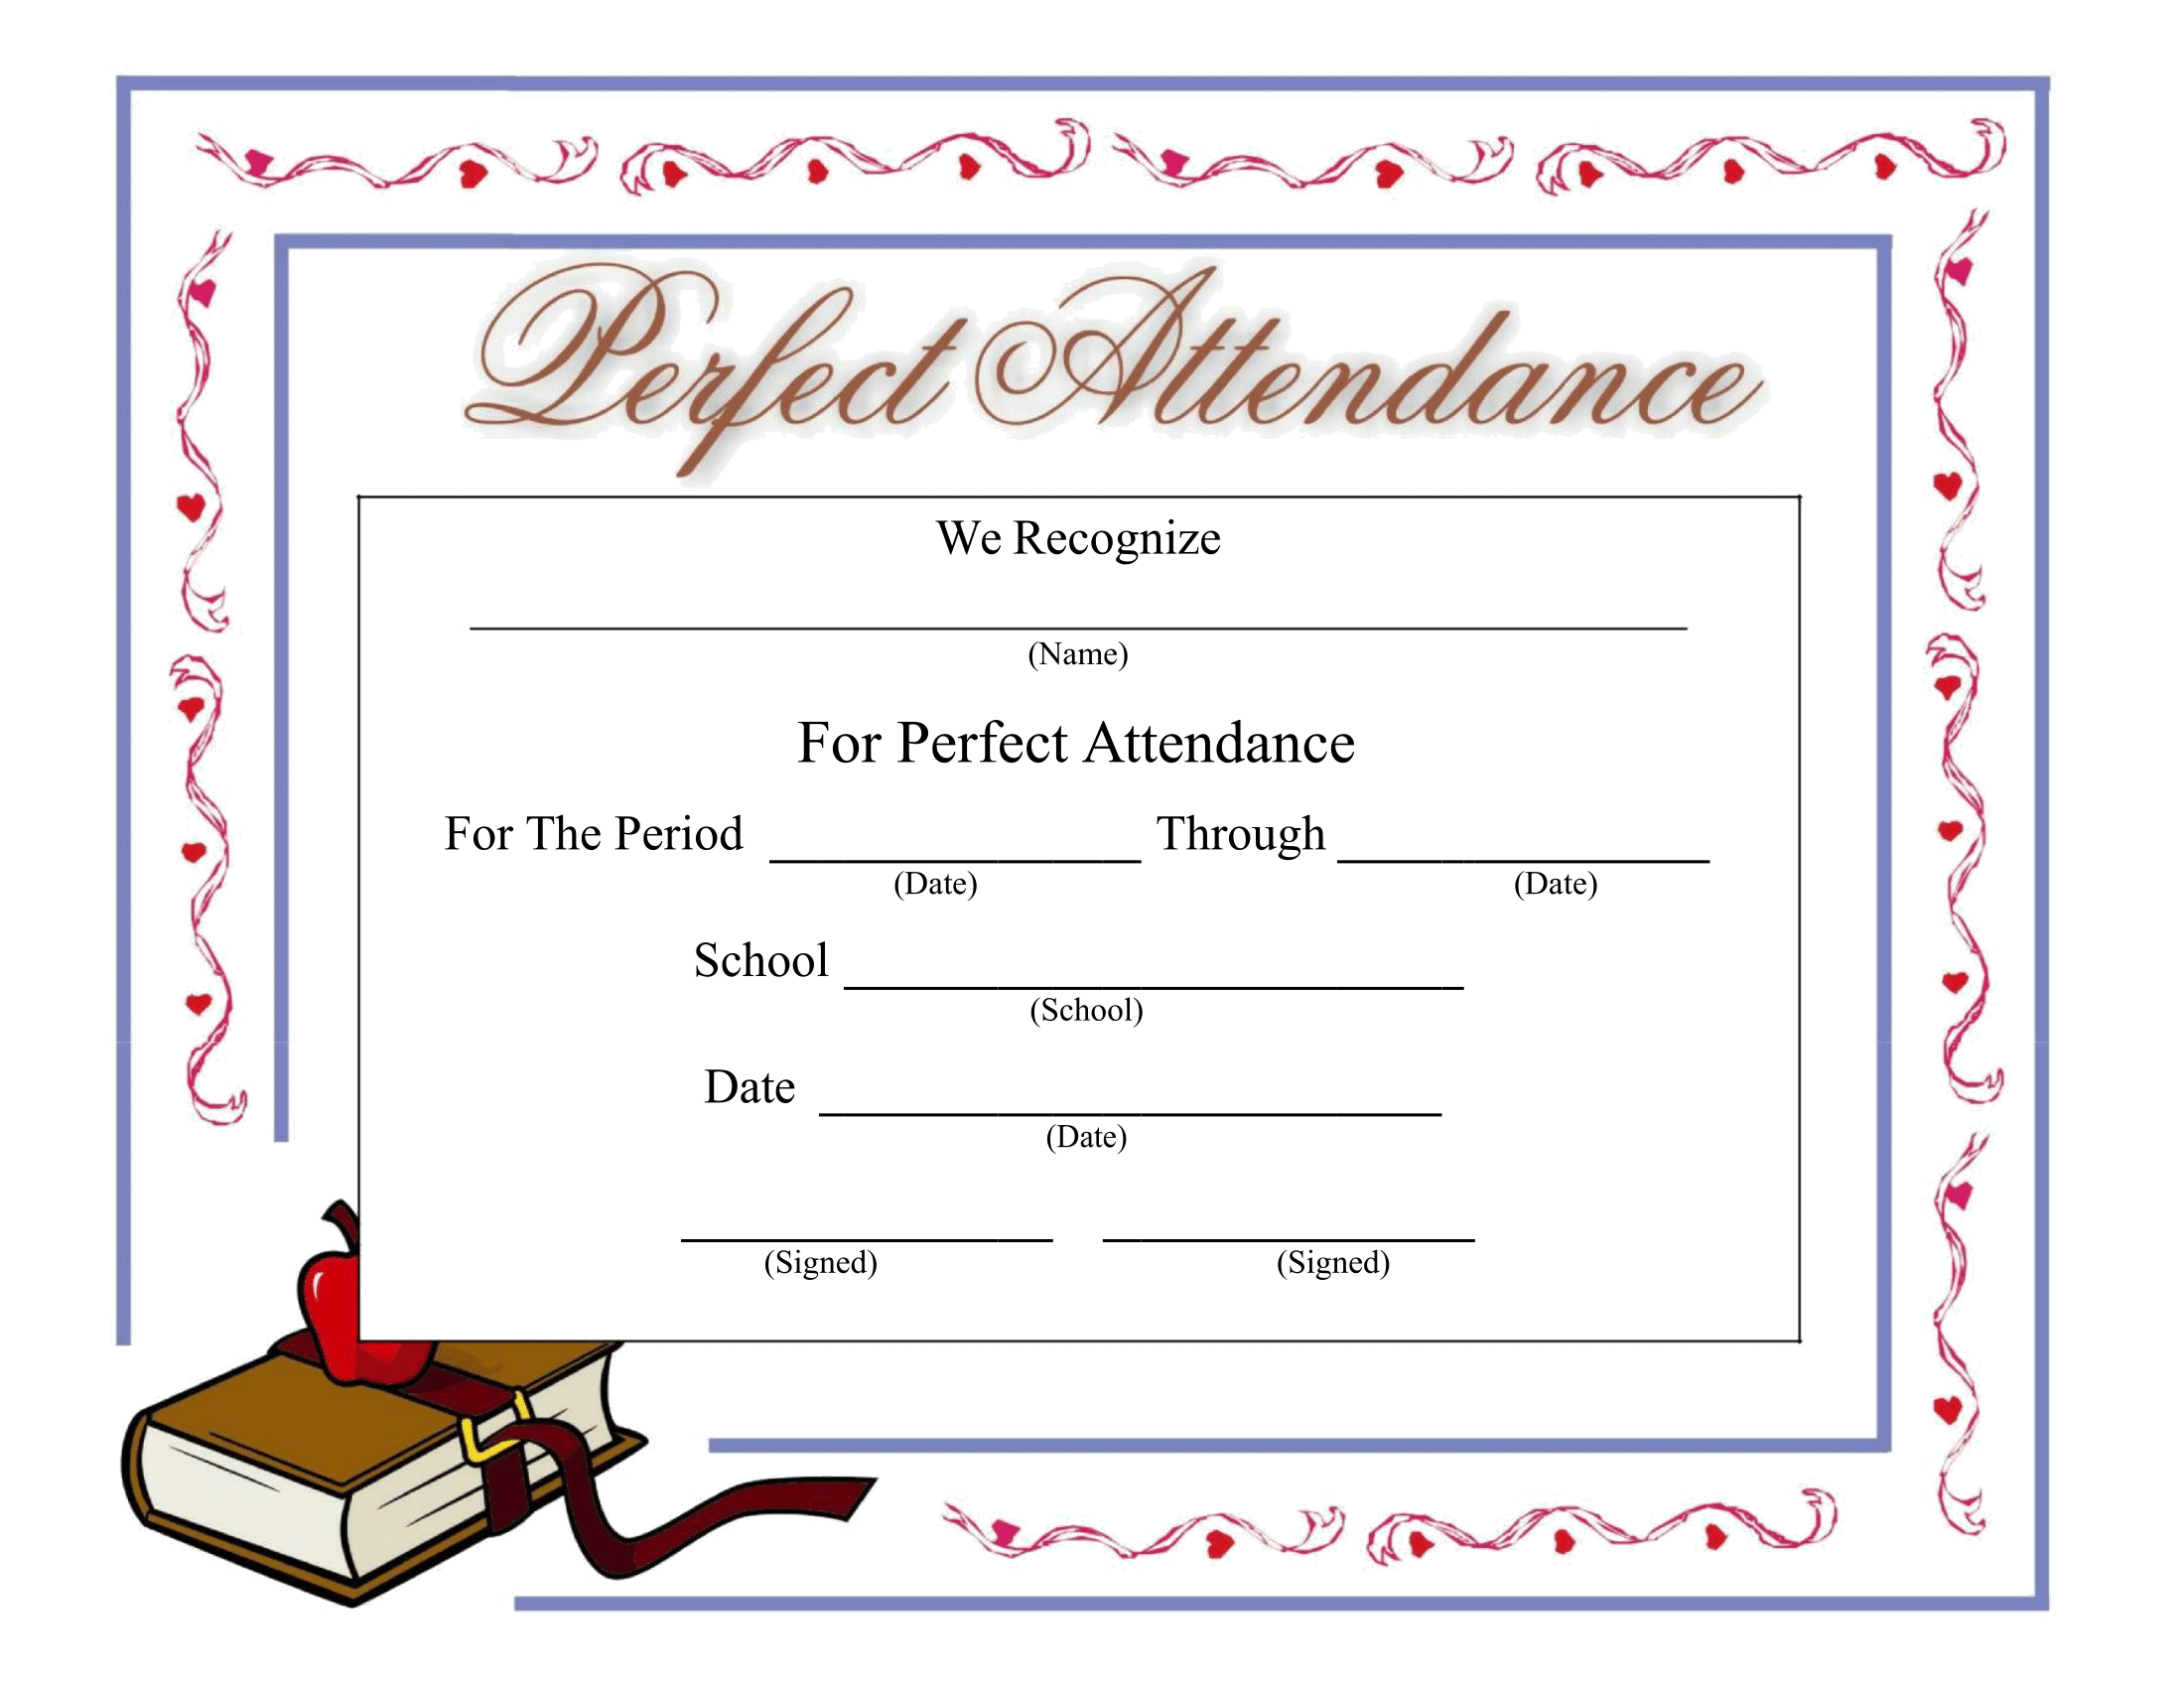 Perfect Attendance Certificate - Download A Free Template Regarding Perfect Attendance Certificate Template